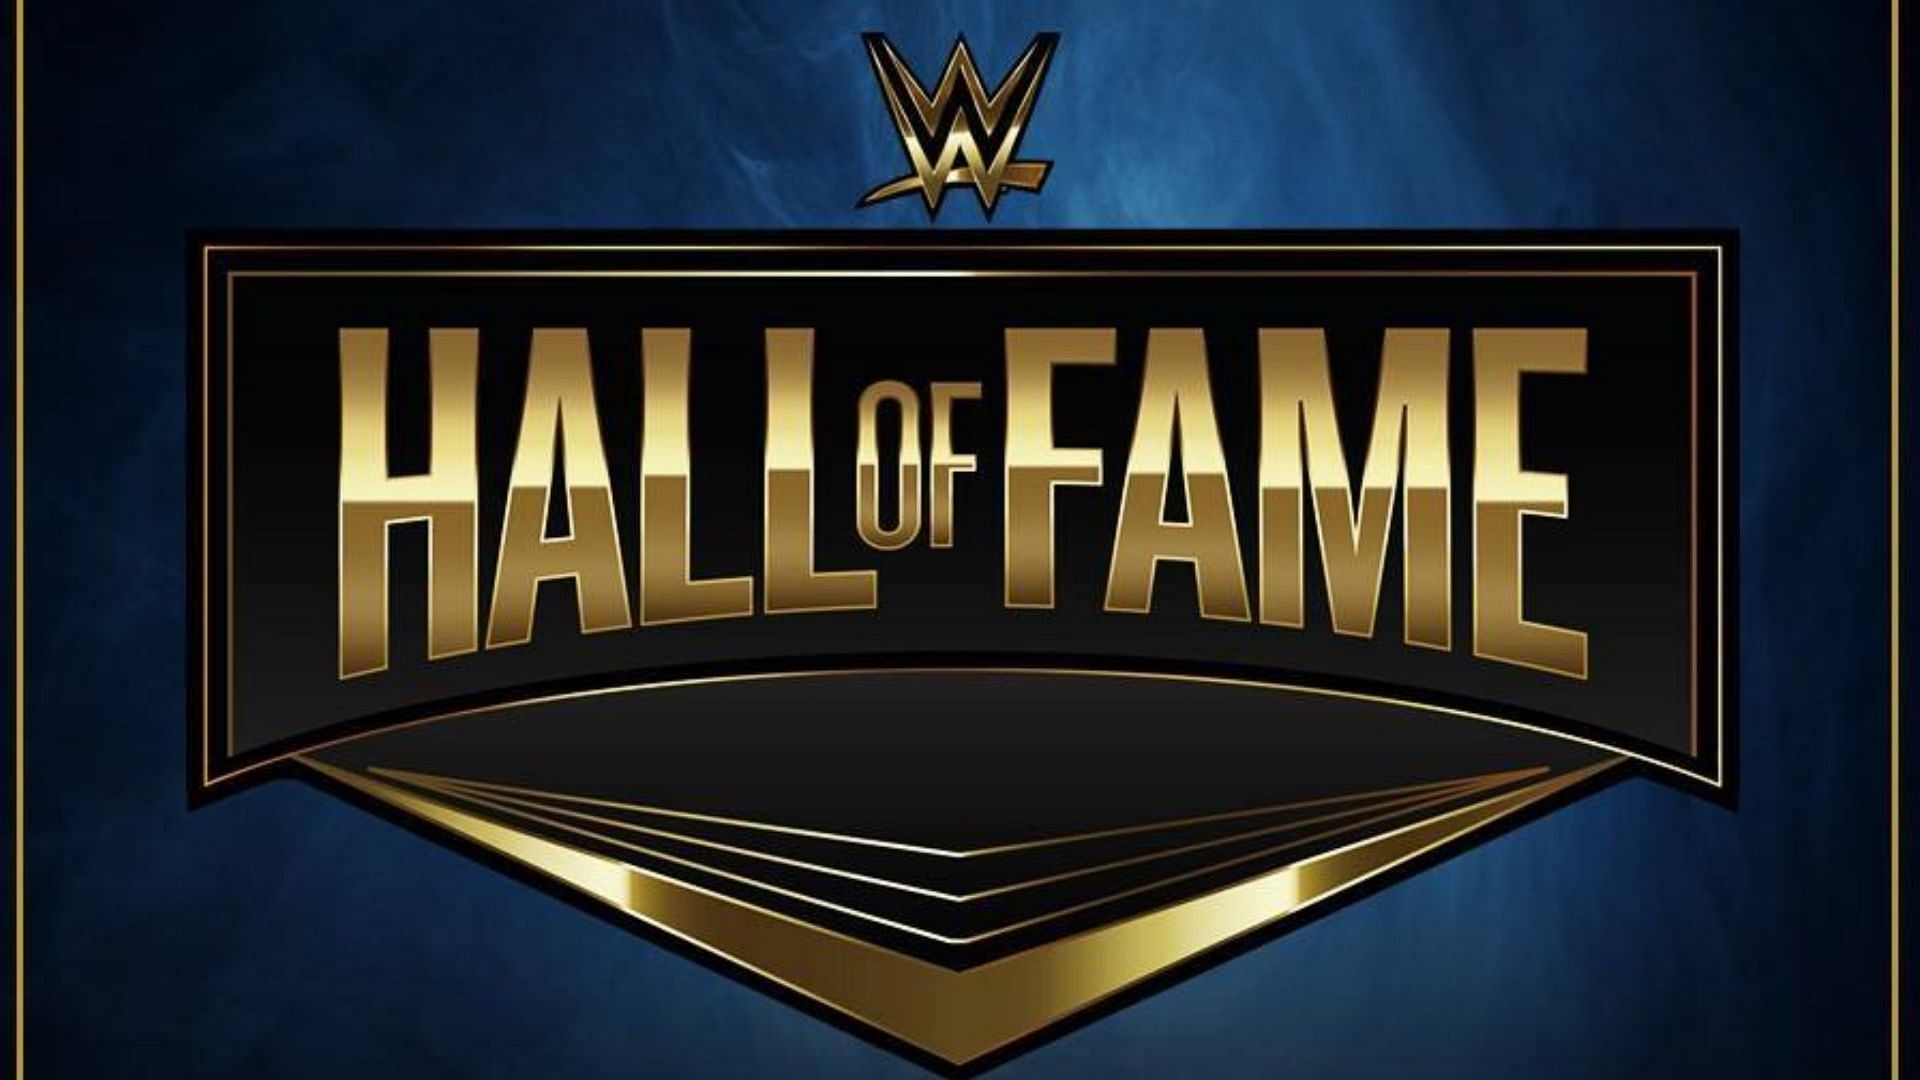 WWE has been using this logo for the Hall of Fame since 2019.